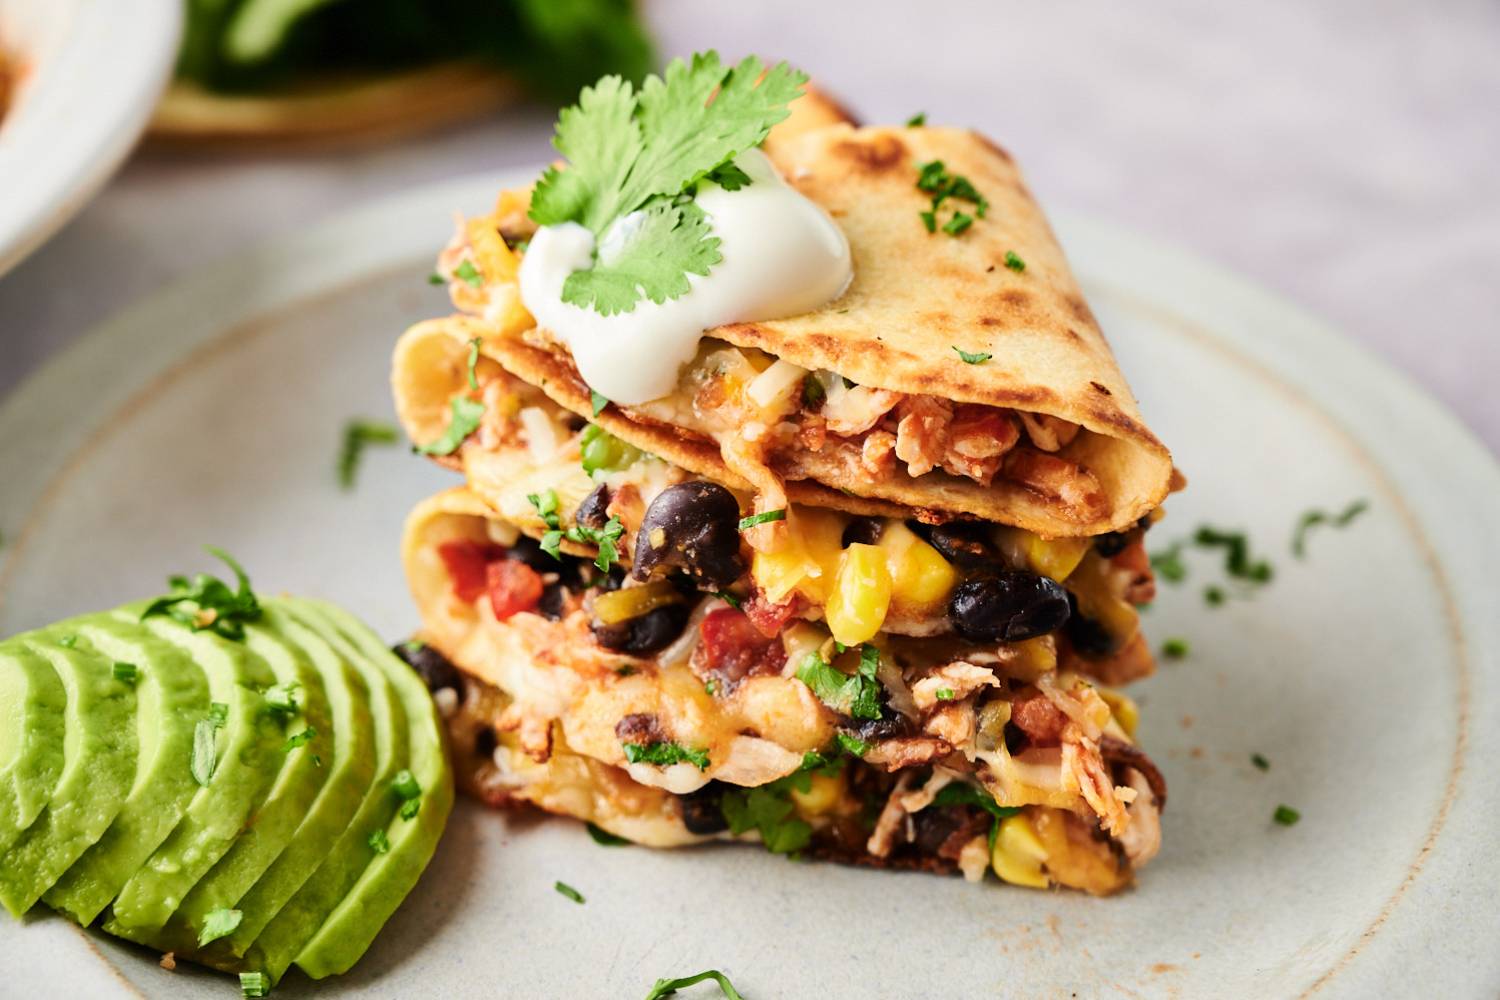 Spicy chicken quesadillas with shredded chicken, melted cheese, black beans, and corn in flour tortillas with sour cream, avocado, and cilantro.